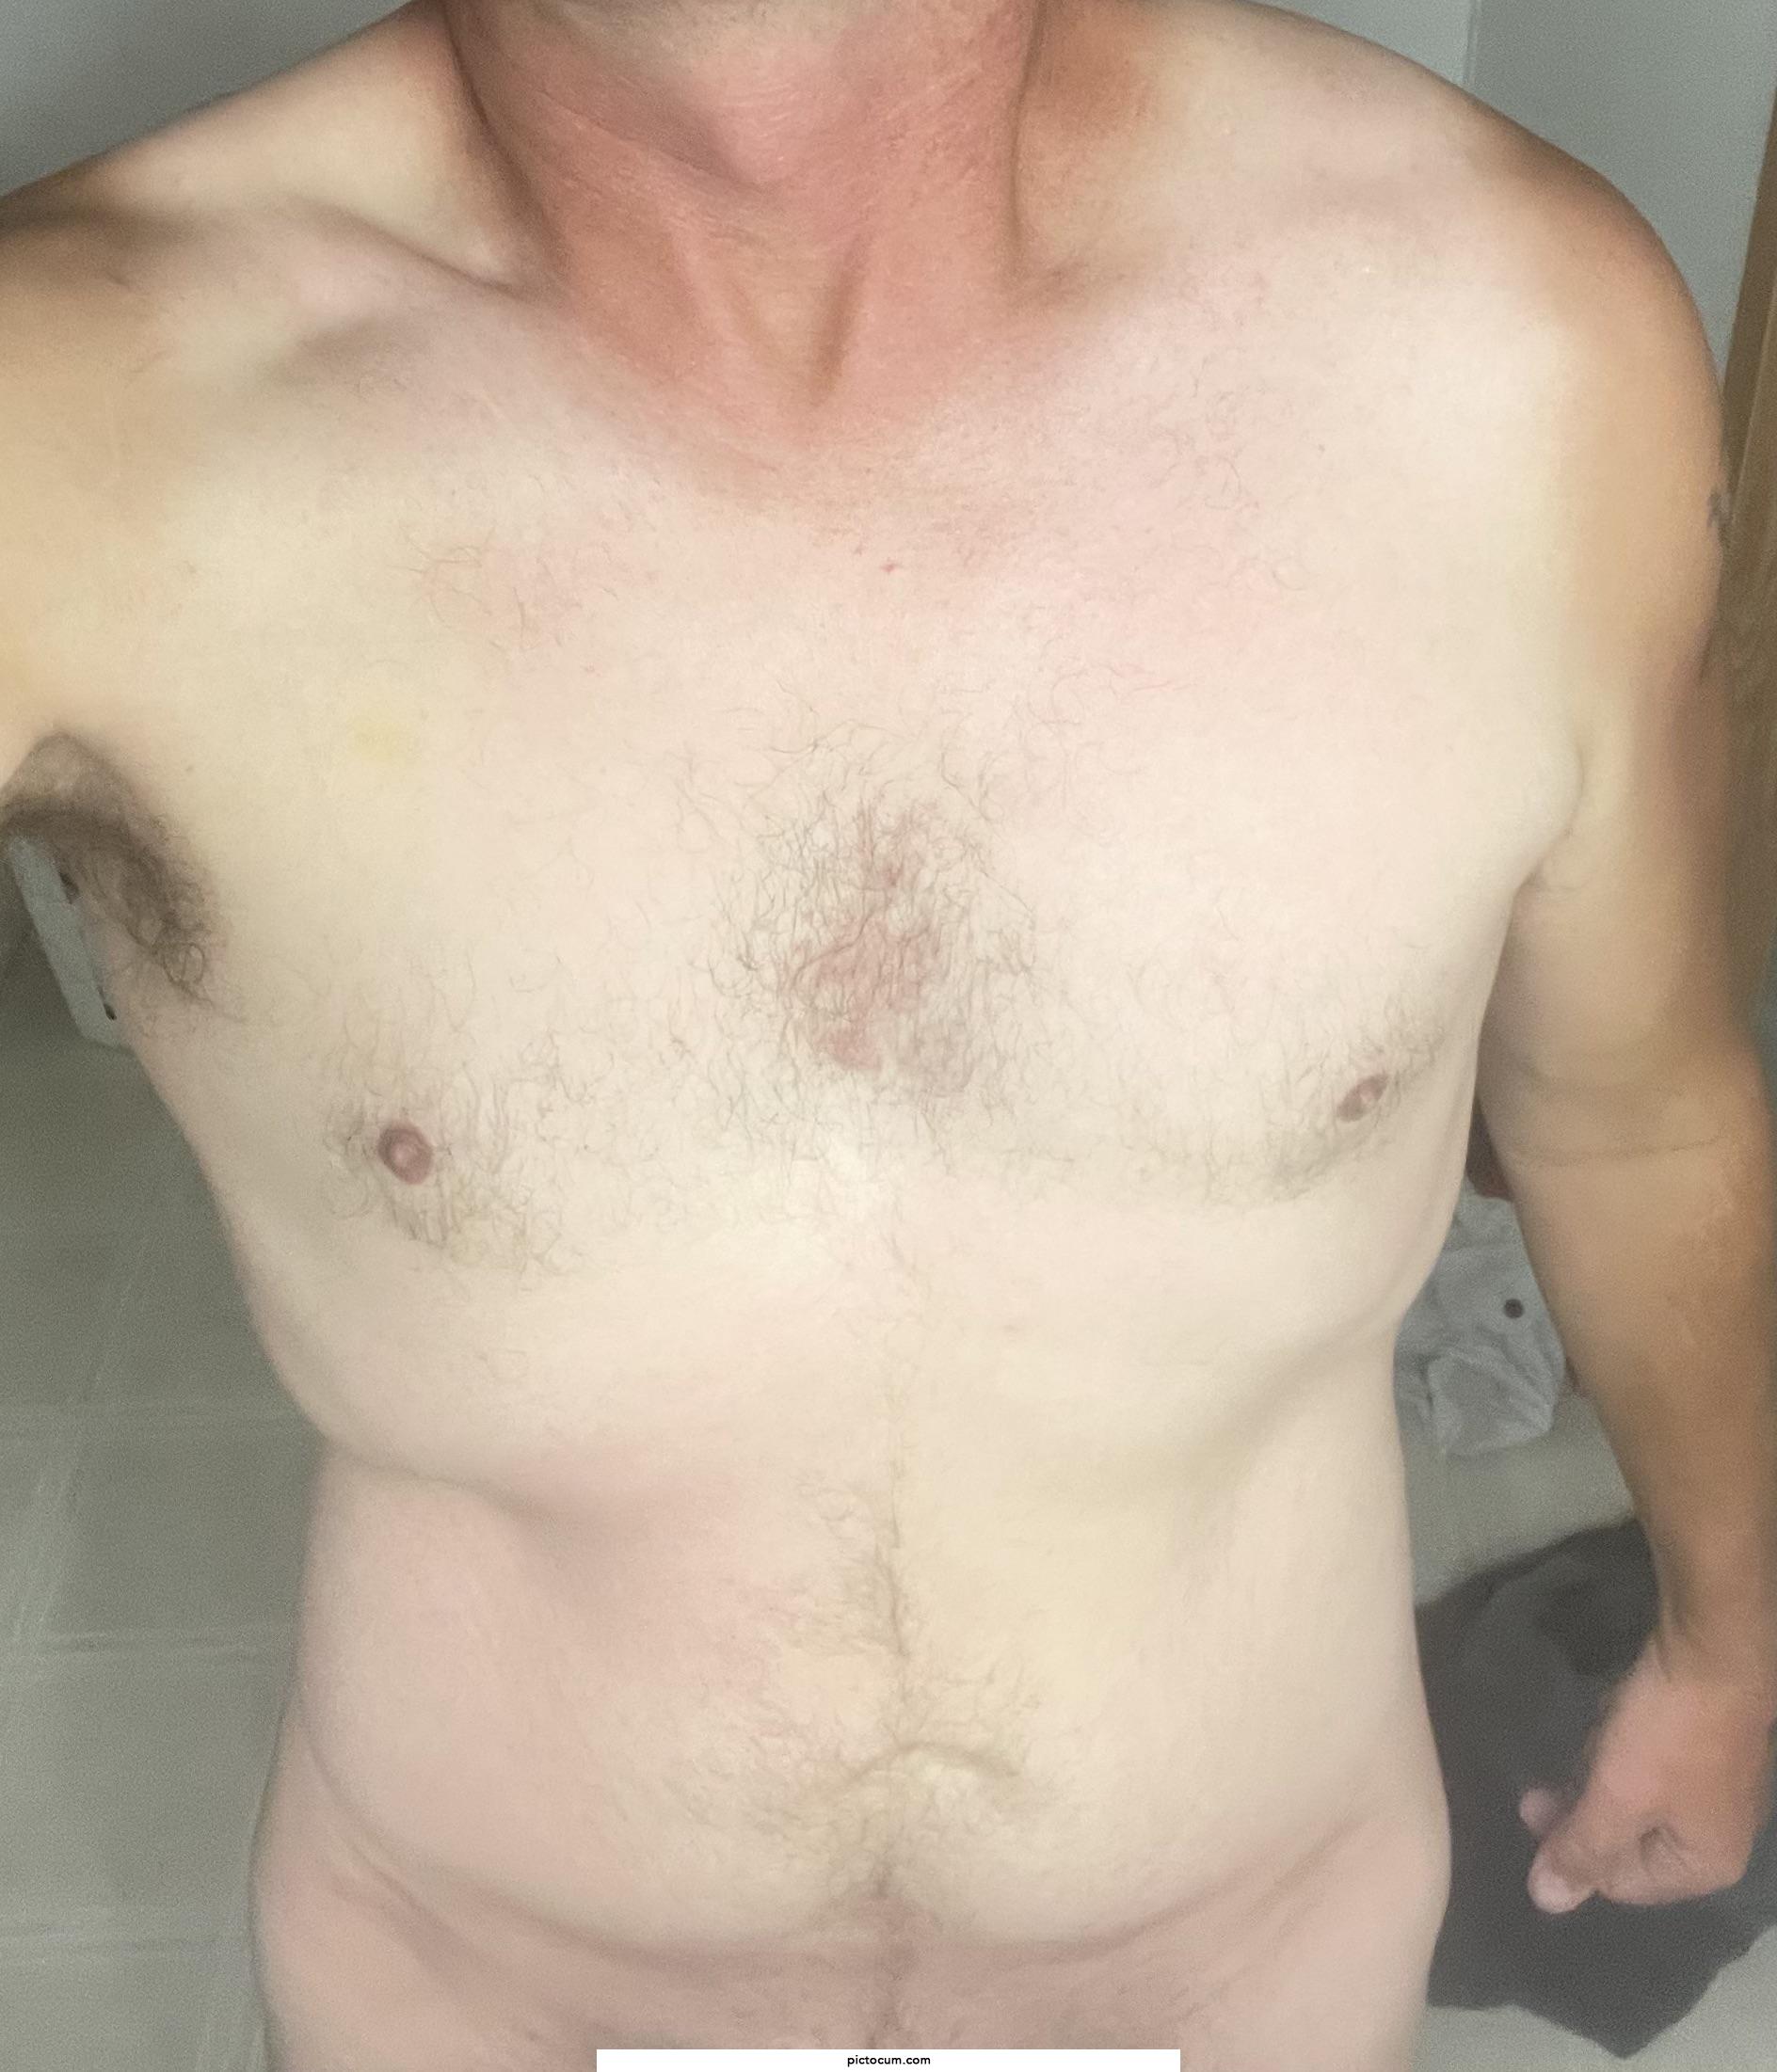 46 Trying to get in shape. Ignore the farmer tan.